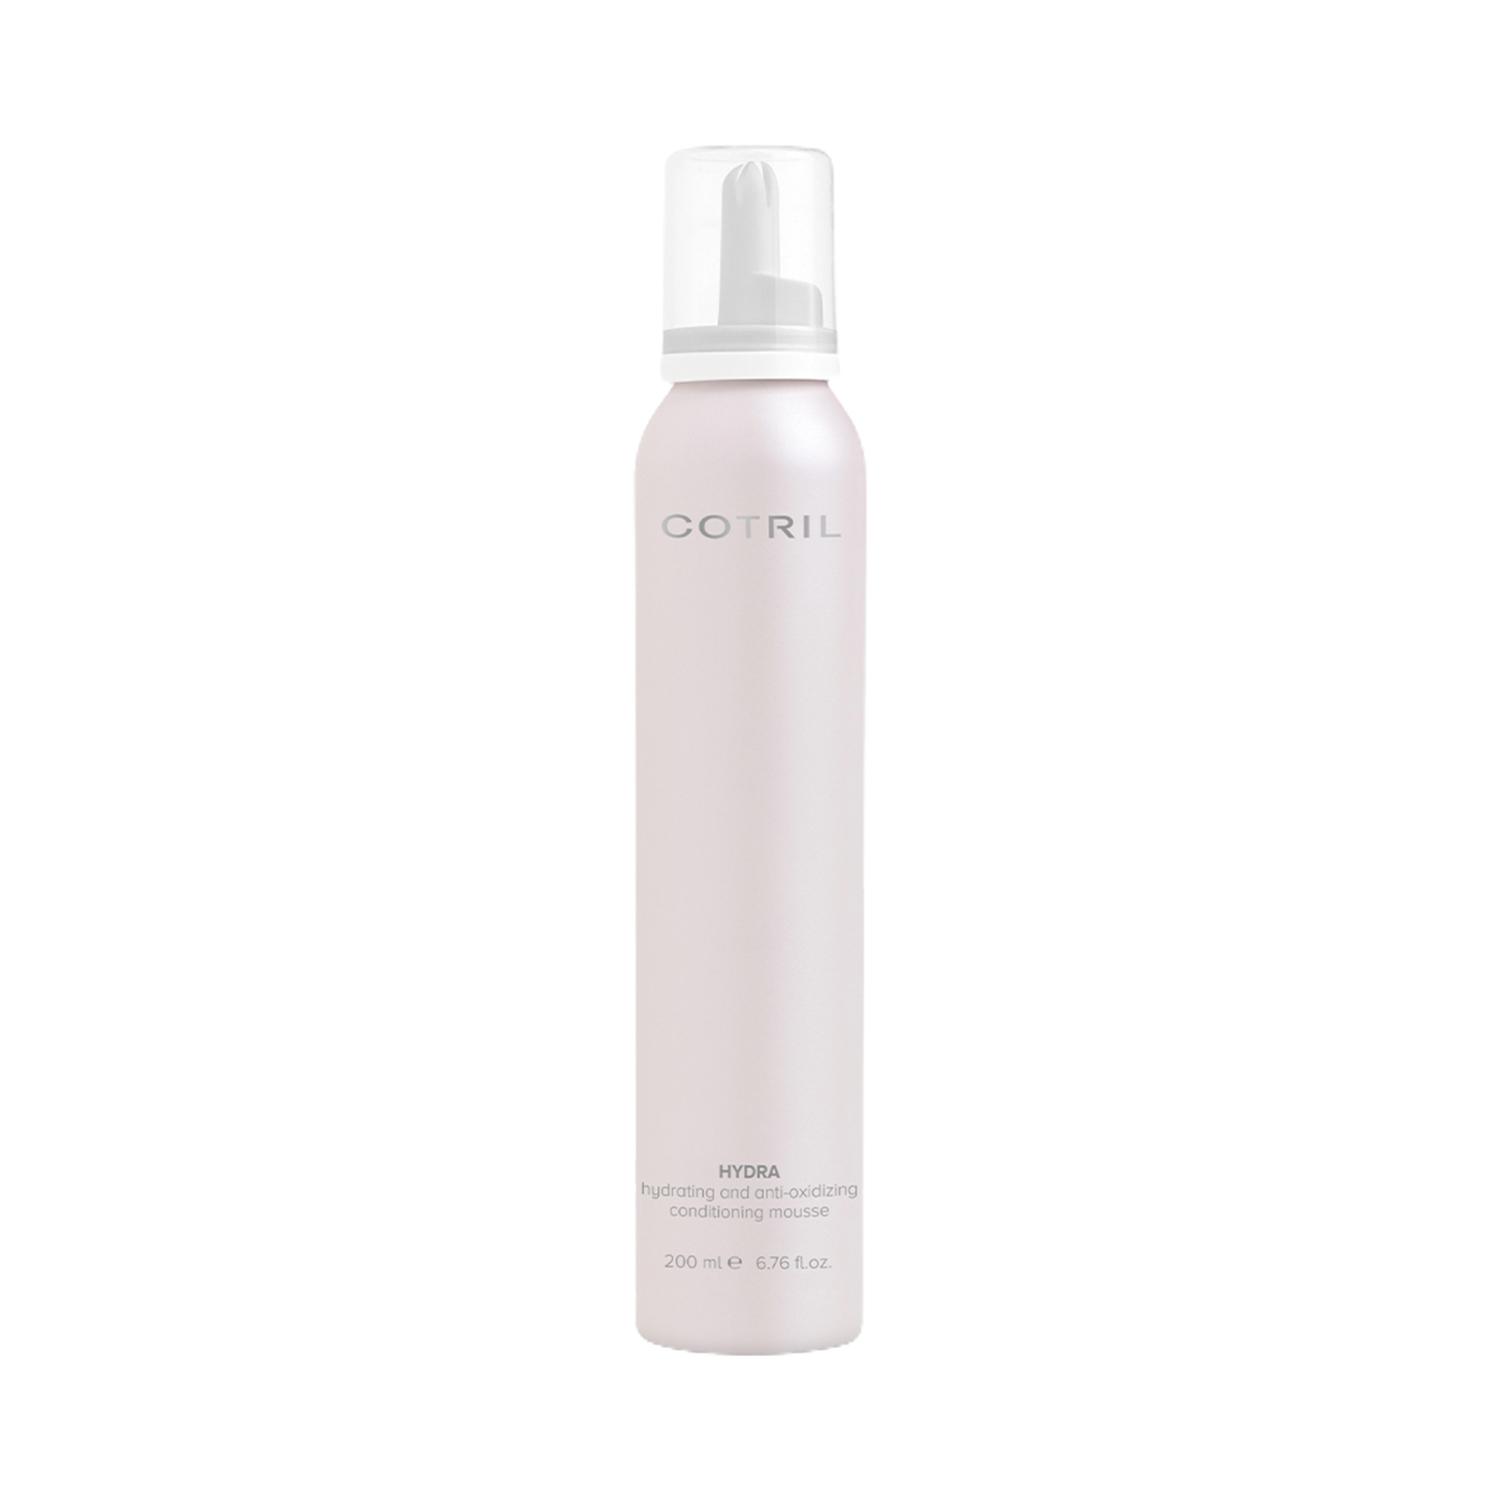 COTRIL Hydra Mousse Hair Cream (200 ml)